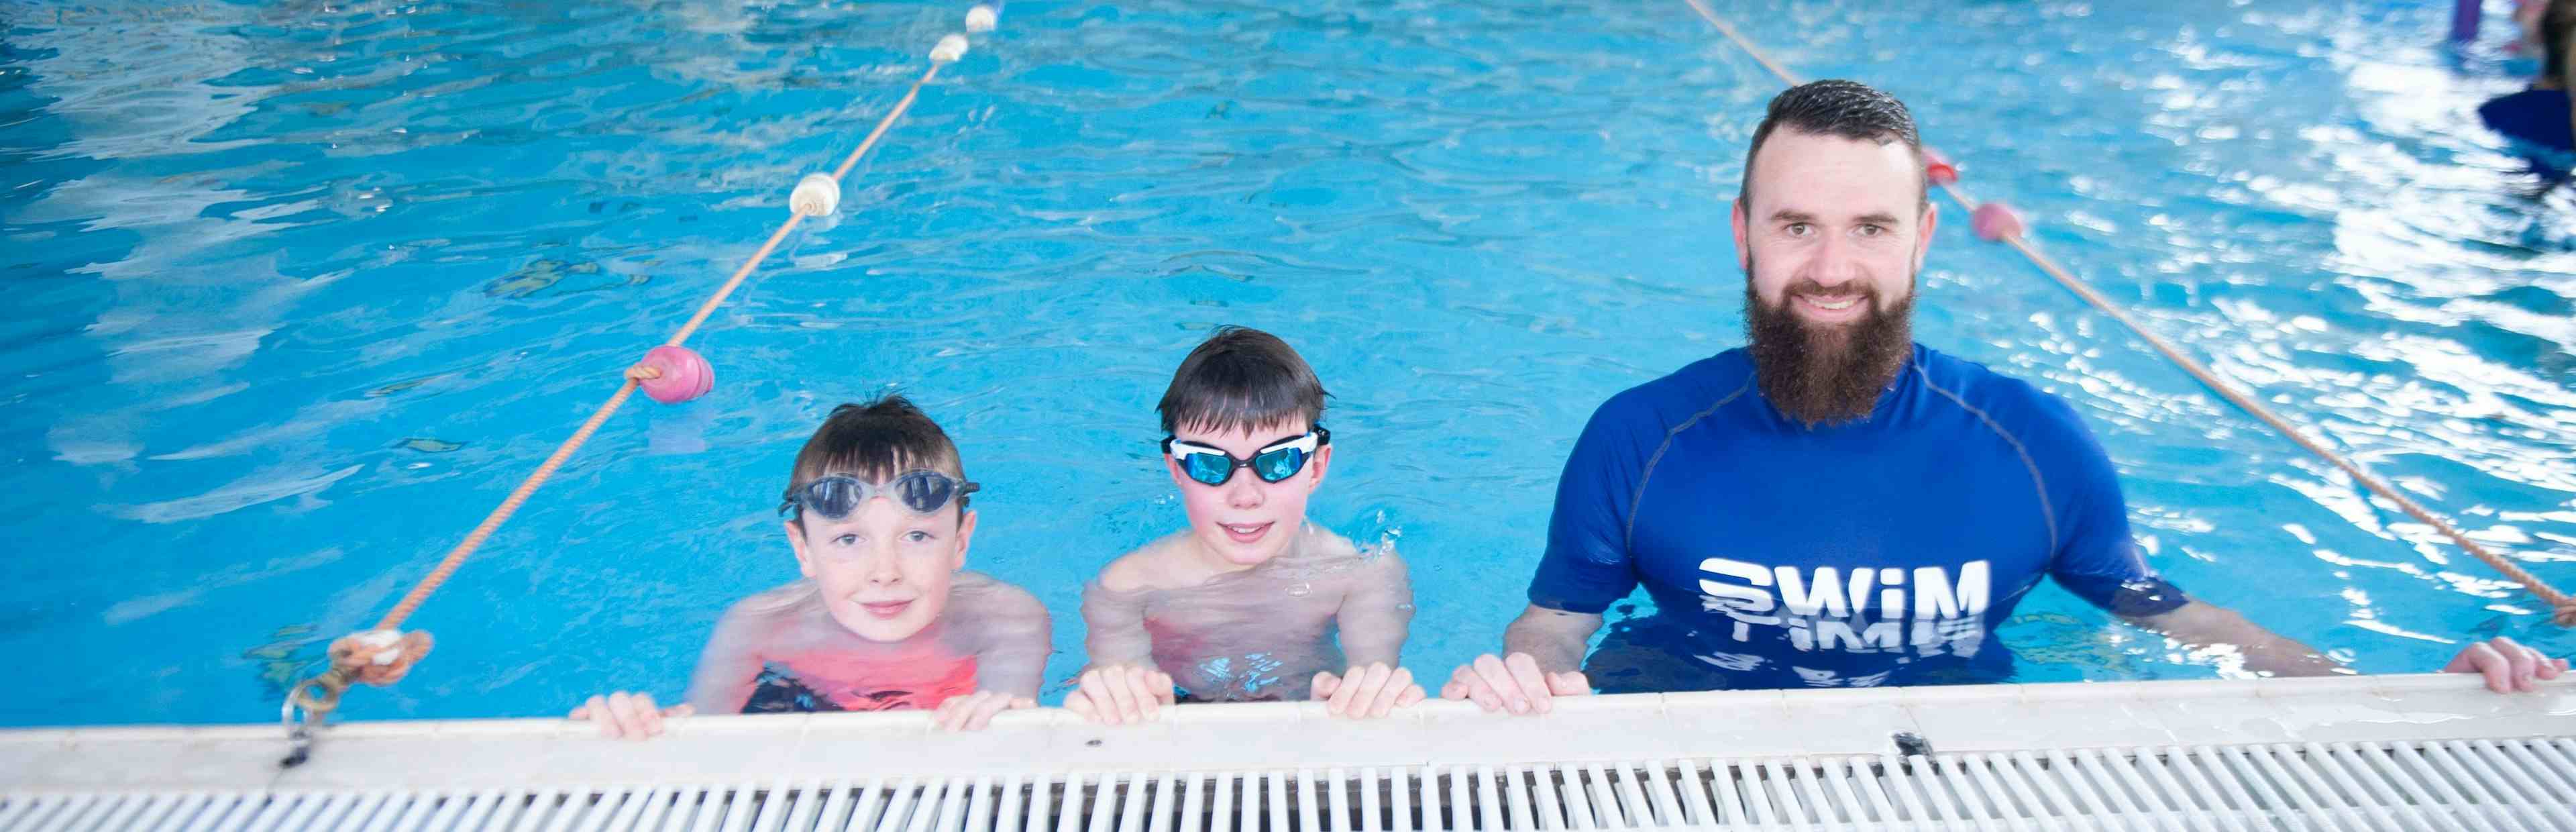 Swimming instructor and children resing on side of pool